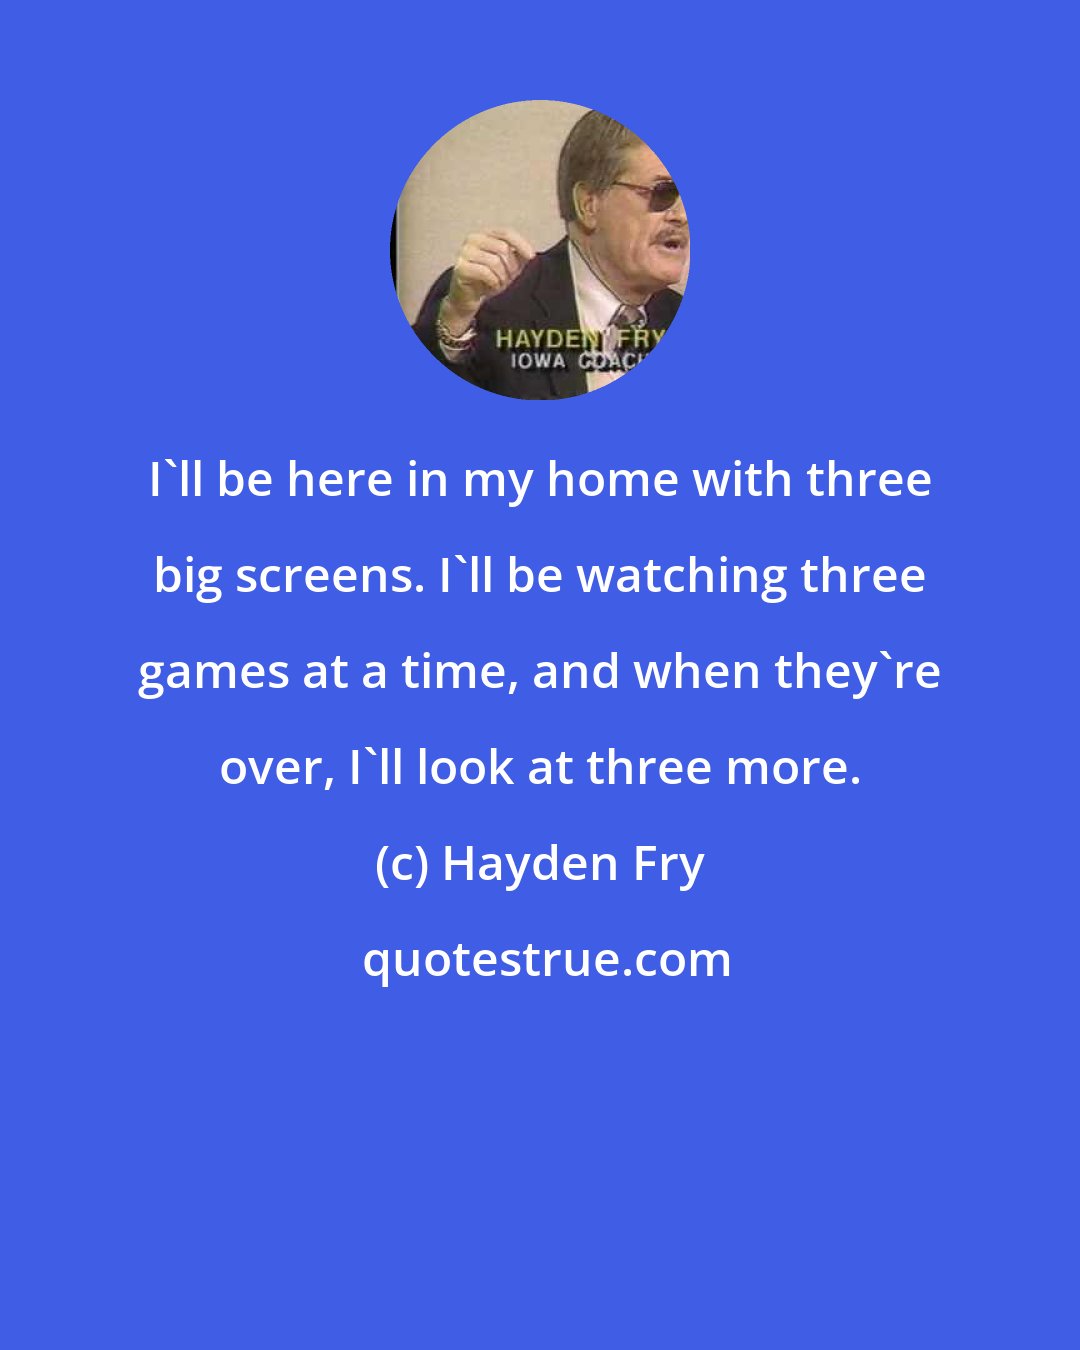 Hayden Fry: I'll be here in my home with three big screens. I'll be watching three games at a time, and when they're over, I'll look at three more.